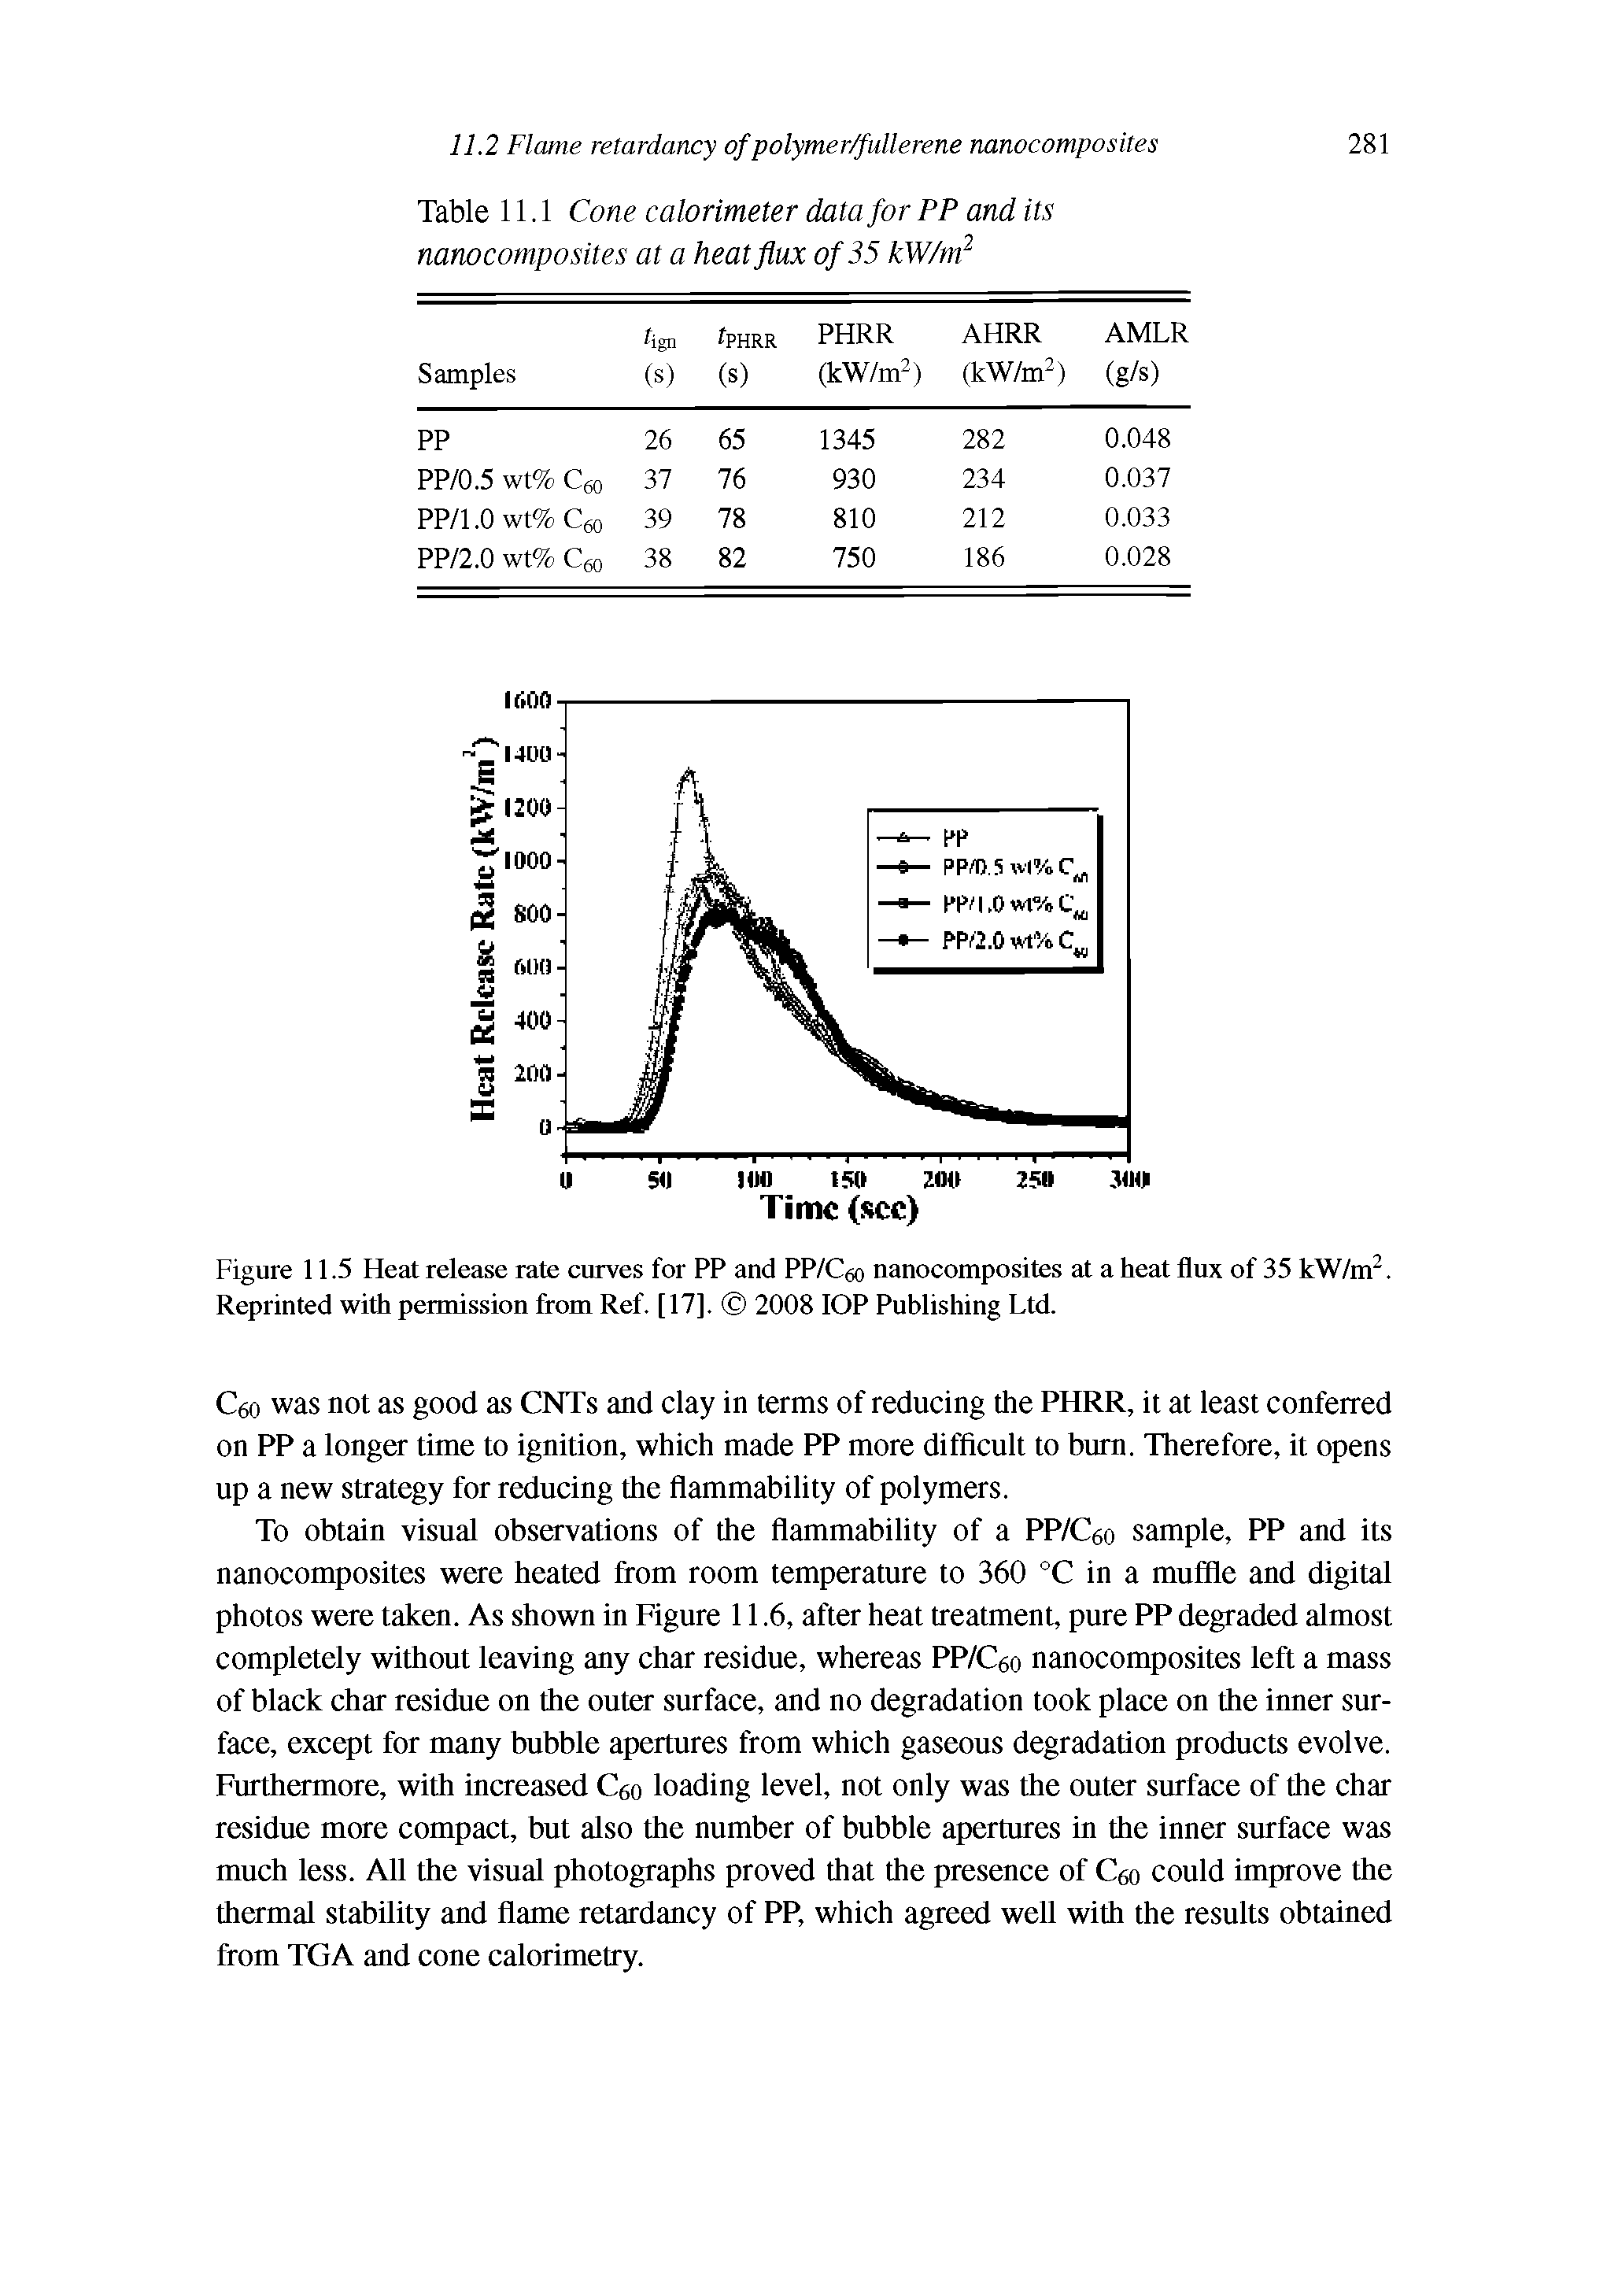 Figure 11.5 Heat release rate curves for PP and PP/Ceo nanocomposites at a heat flux of 35 kW/m. Reprinted with permission from Ref. [17]. 2008 lOP Publishing Ltd.